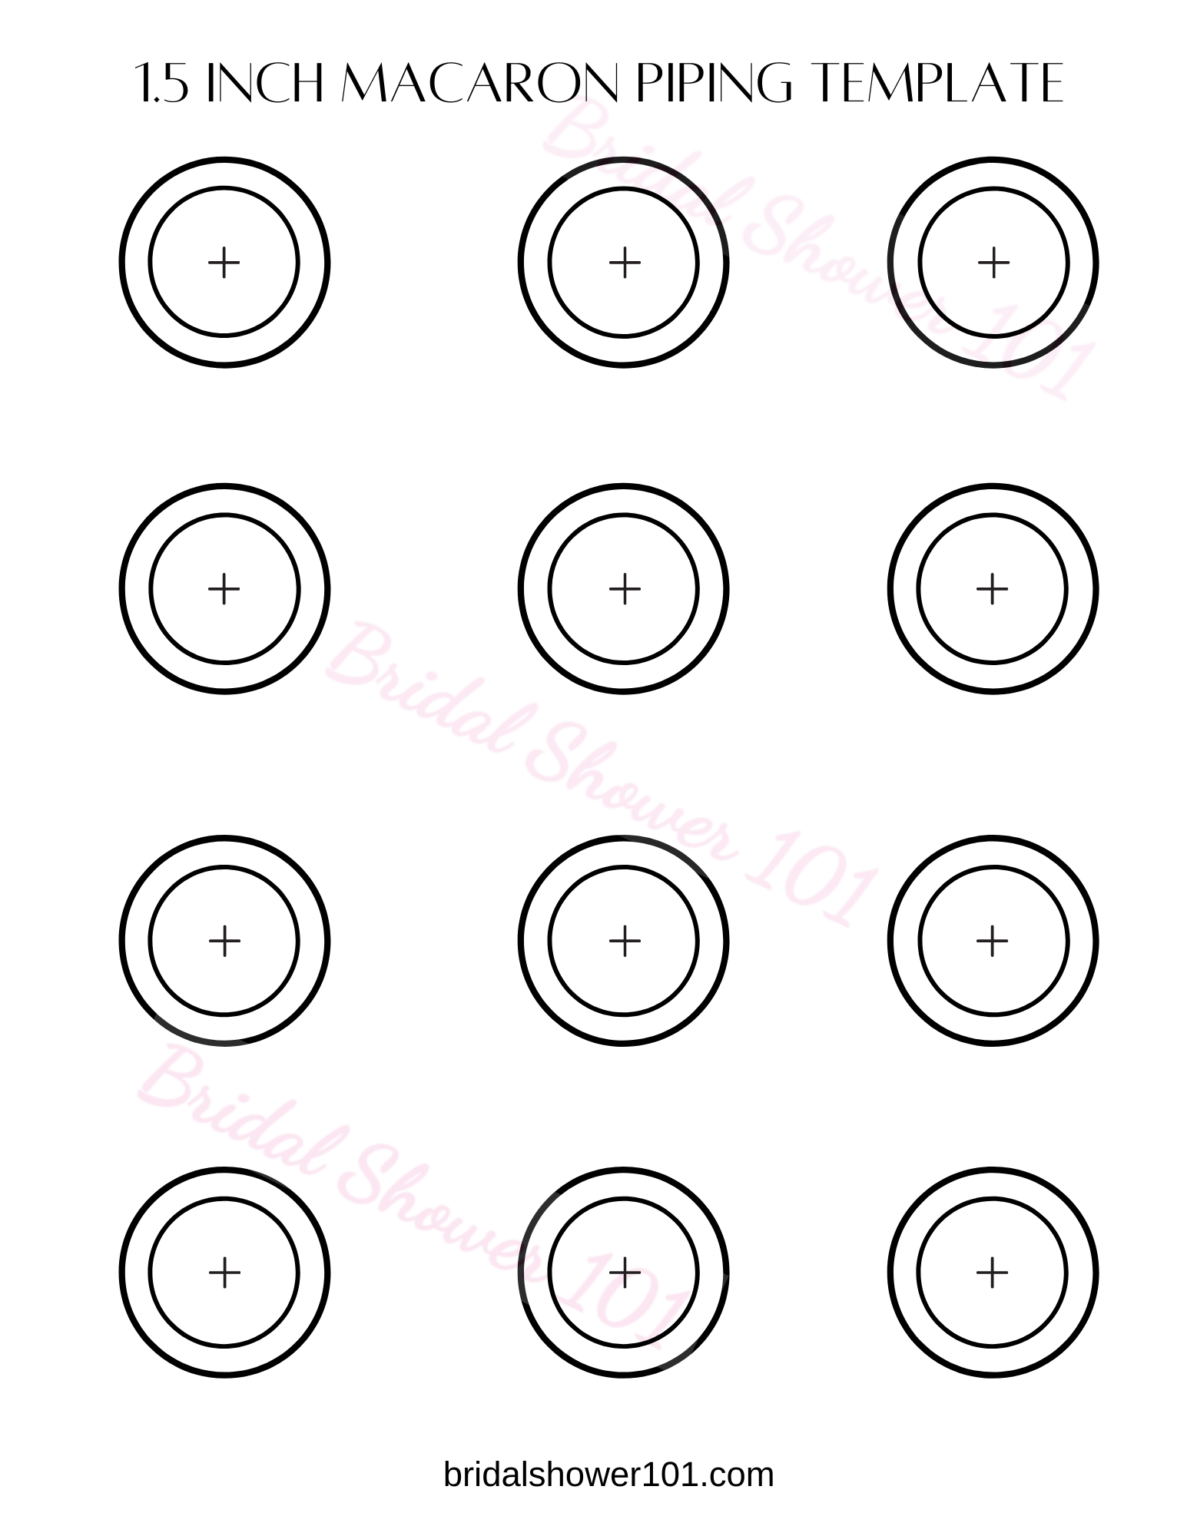 1-5-inch-macaron-piping-template-bridal-shower-101